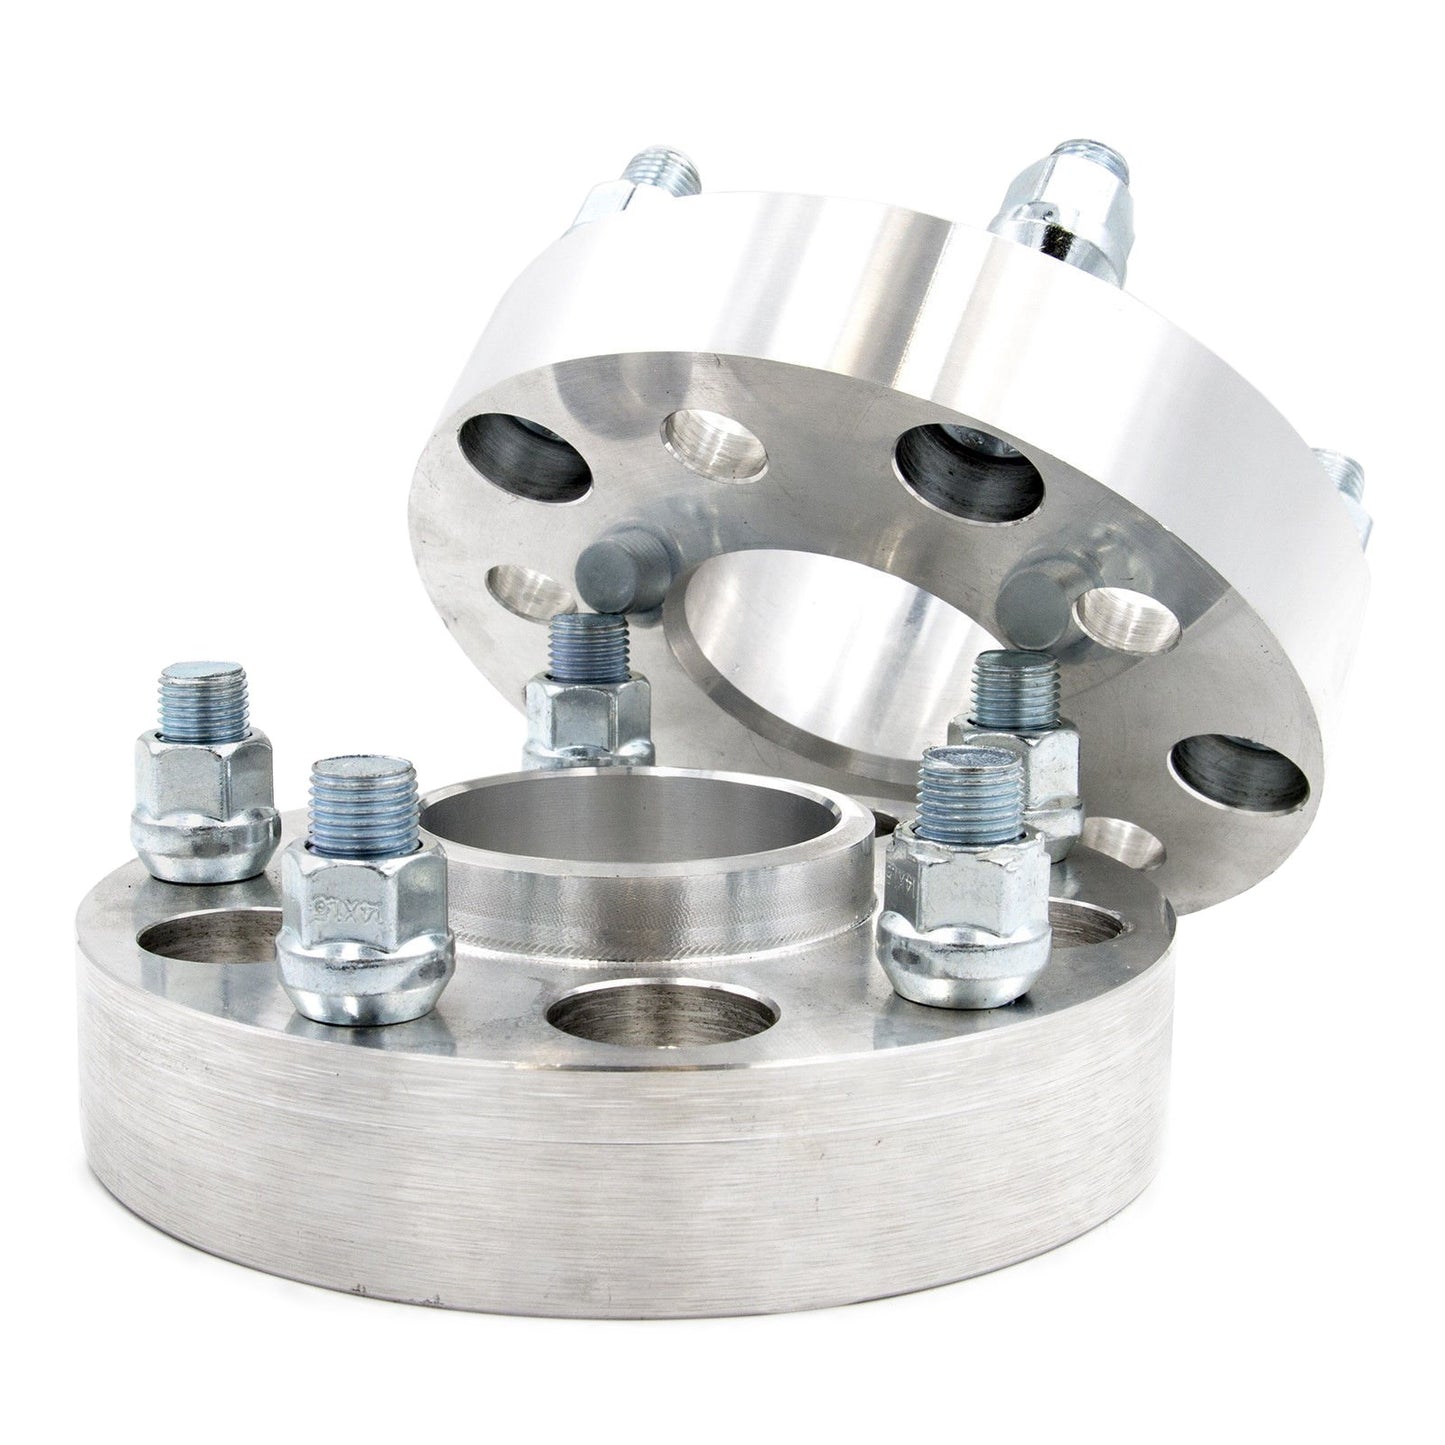 5x5" to 5x5" Hub Centric Wheel Spacer/Adapter - Thickness: 1" - 3"